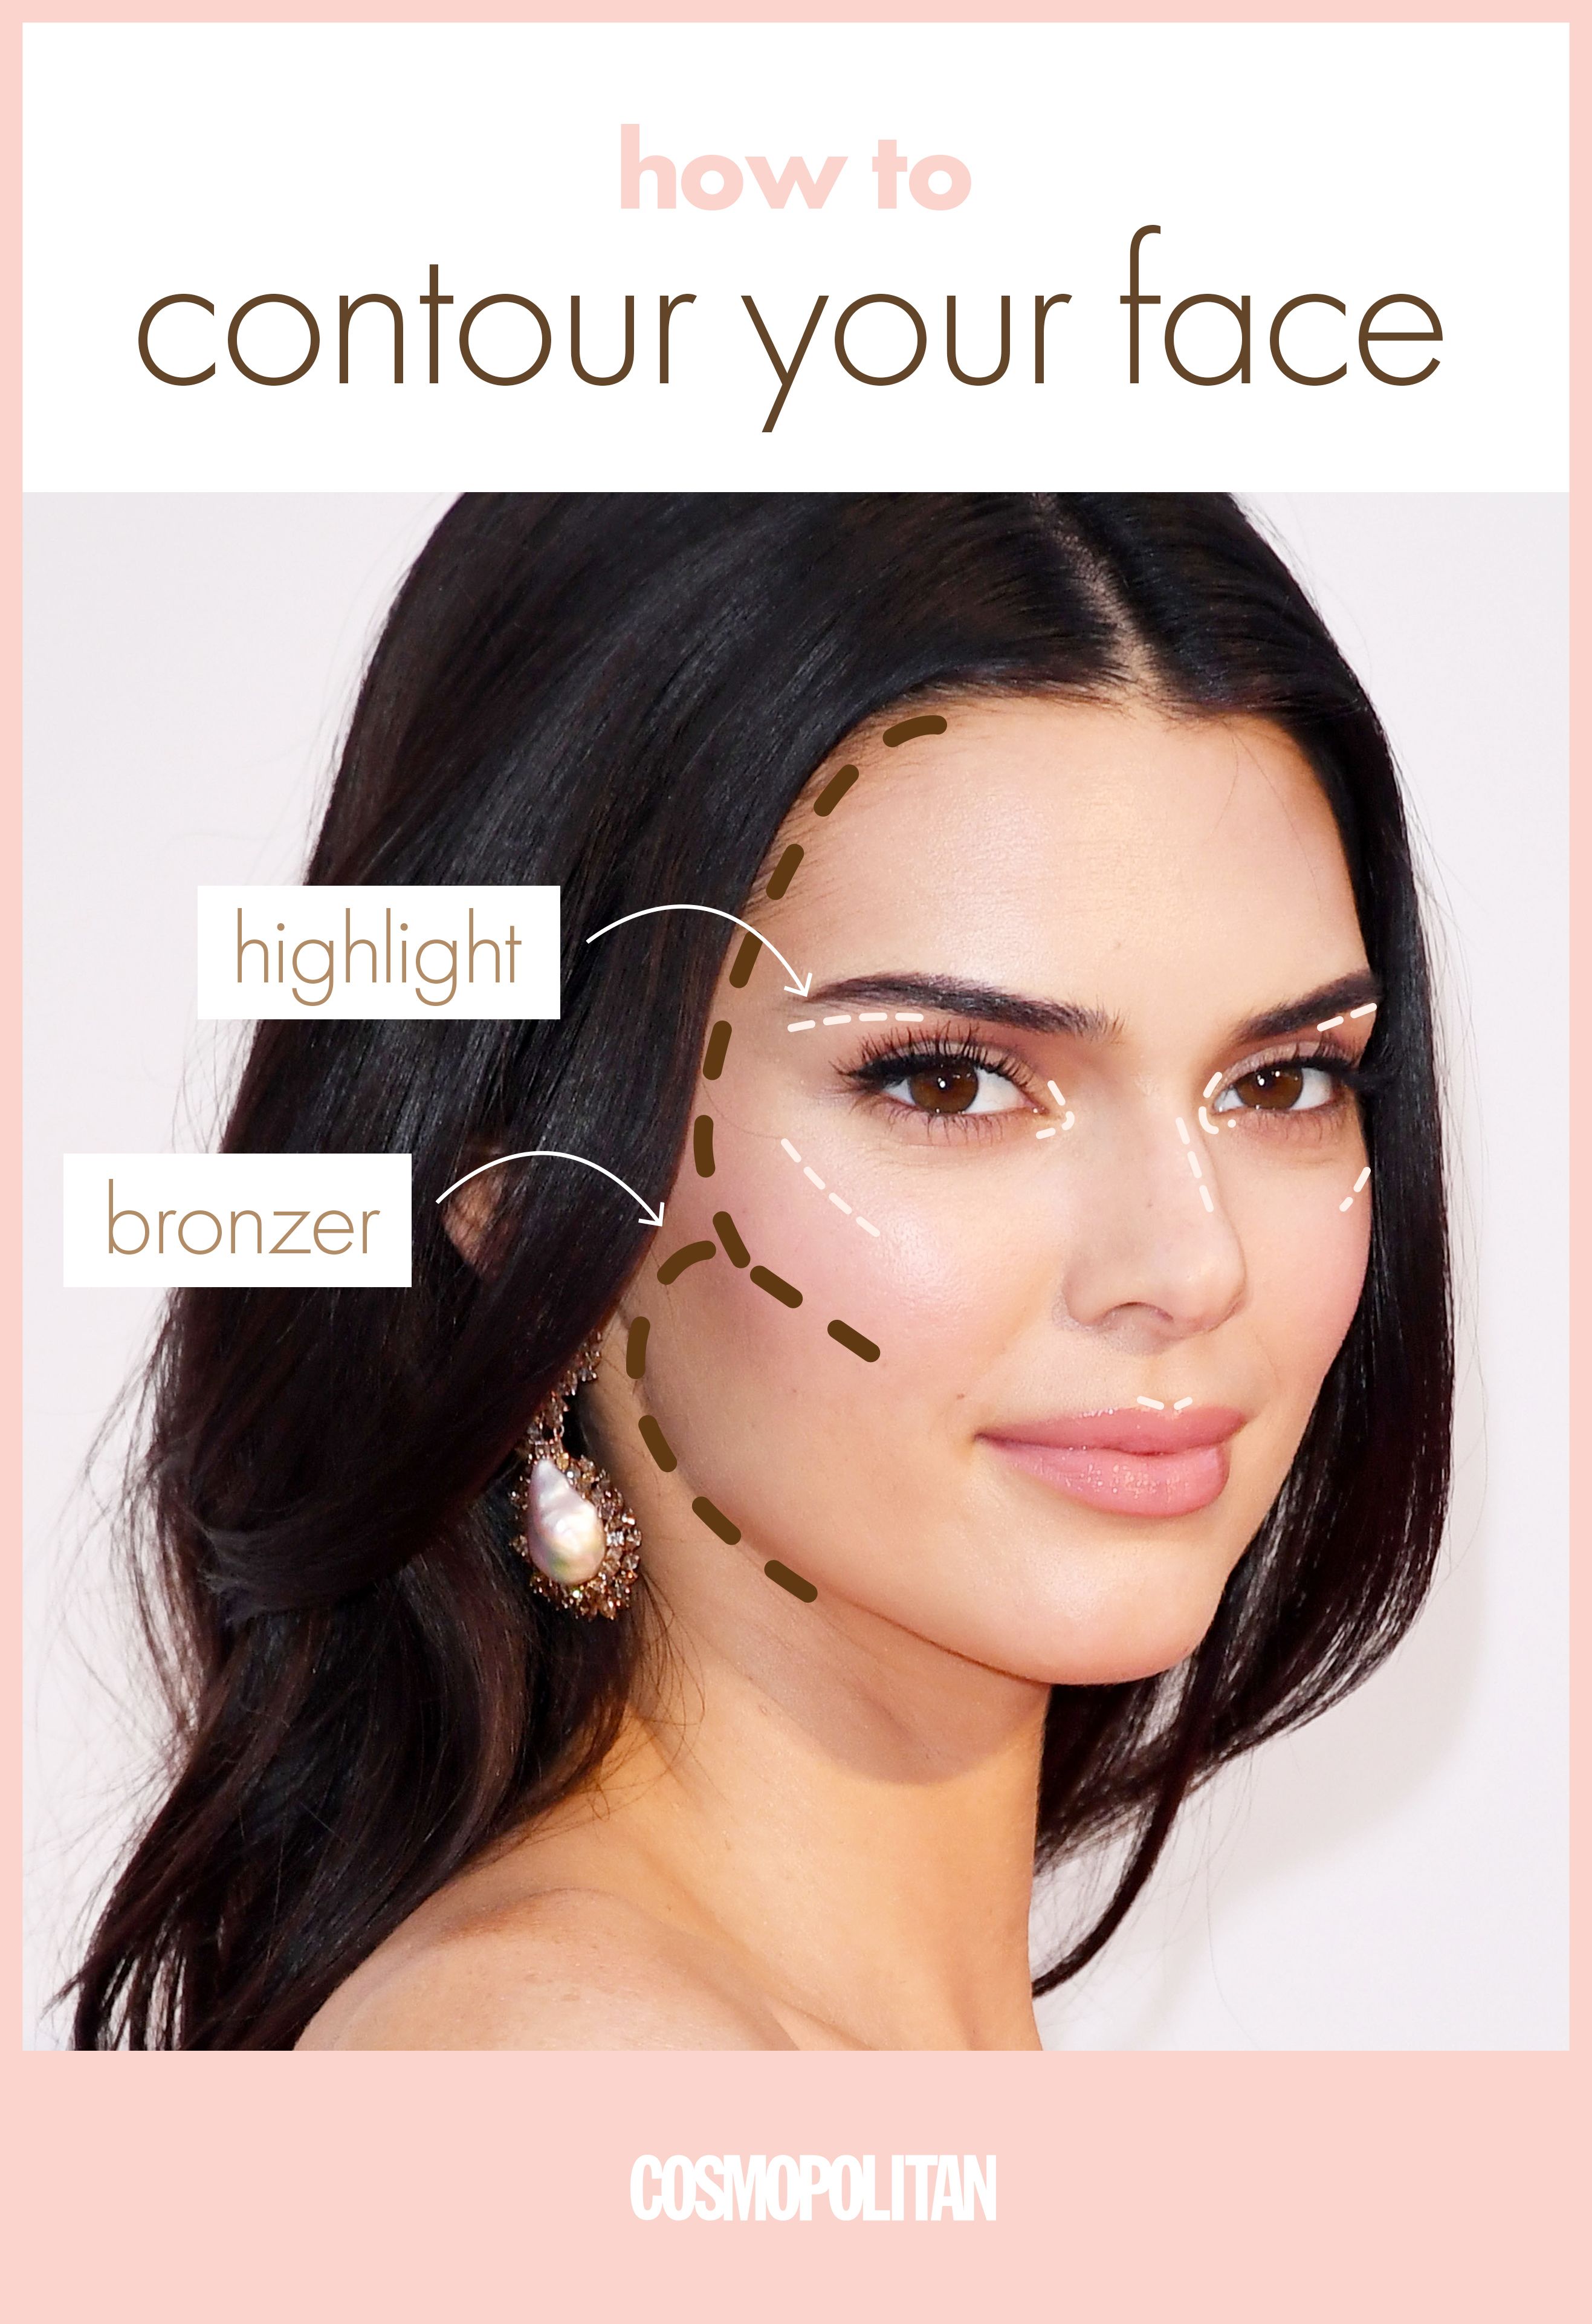 smooth contour meaning